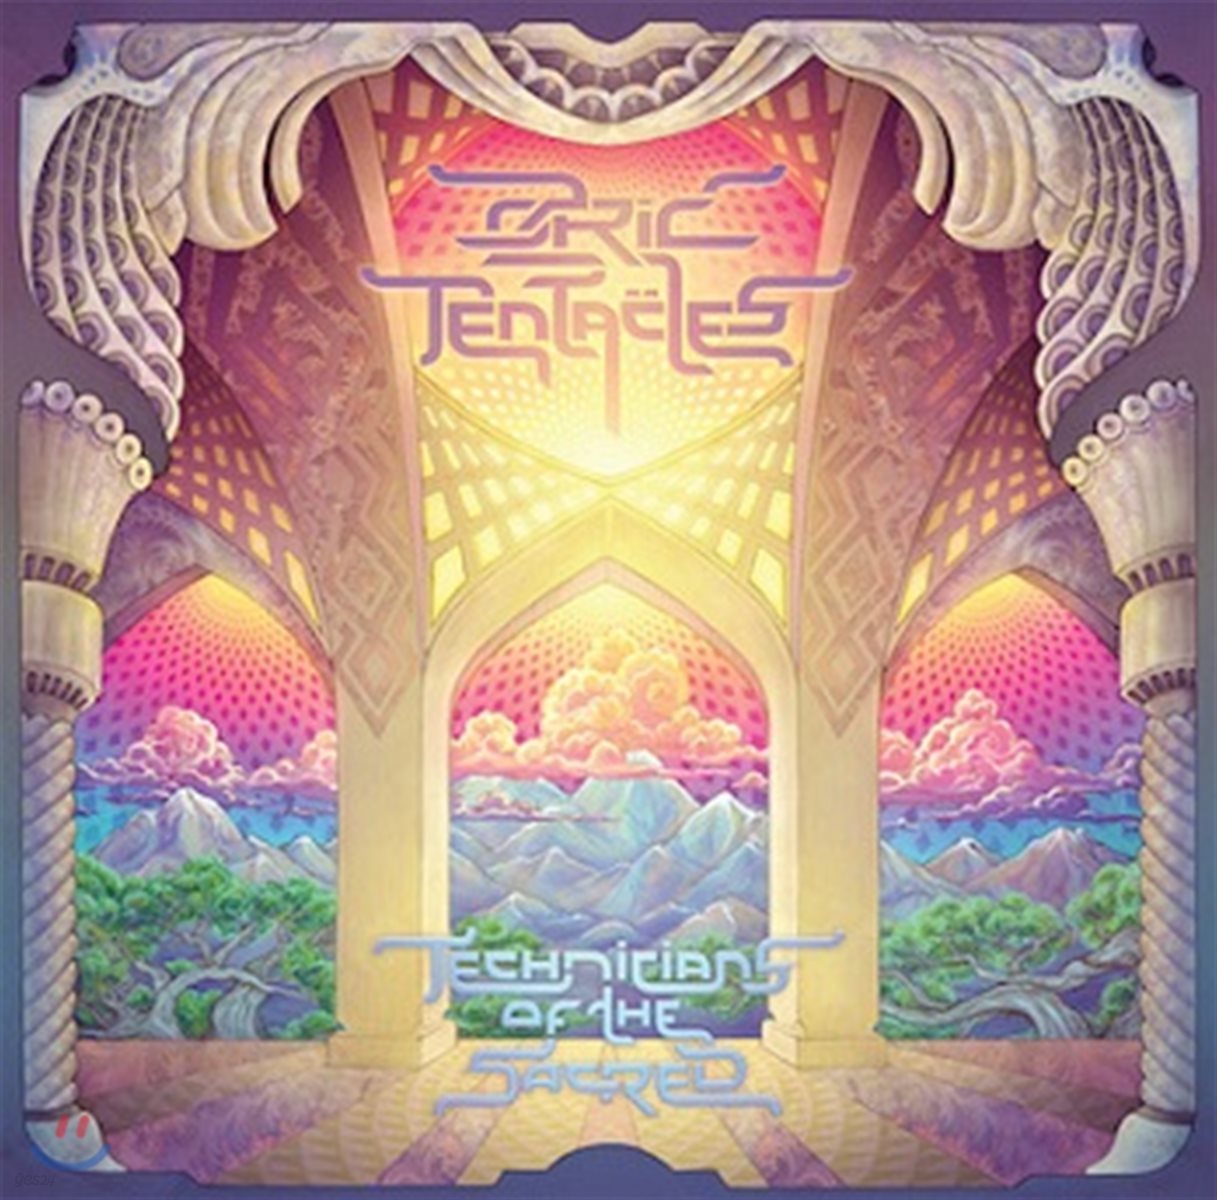 Ozric Tentacles (오즈릭 텐터클스) - Technicians Of The Sacred